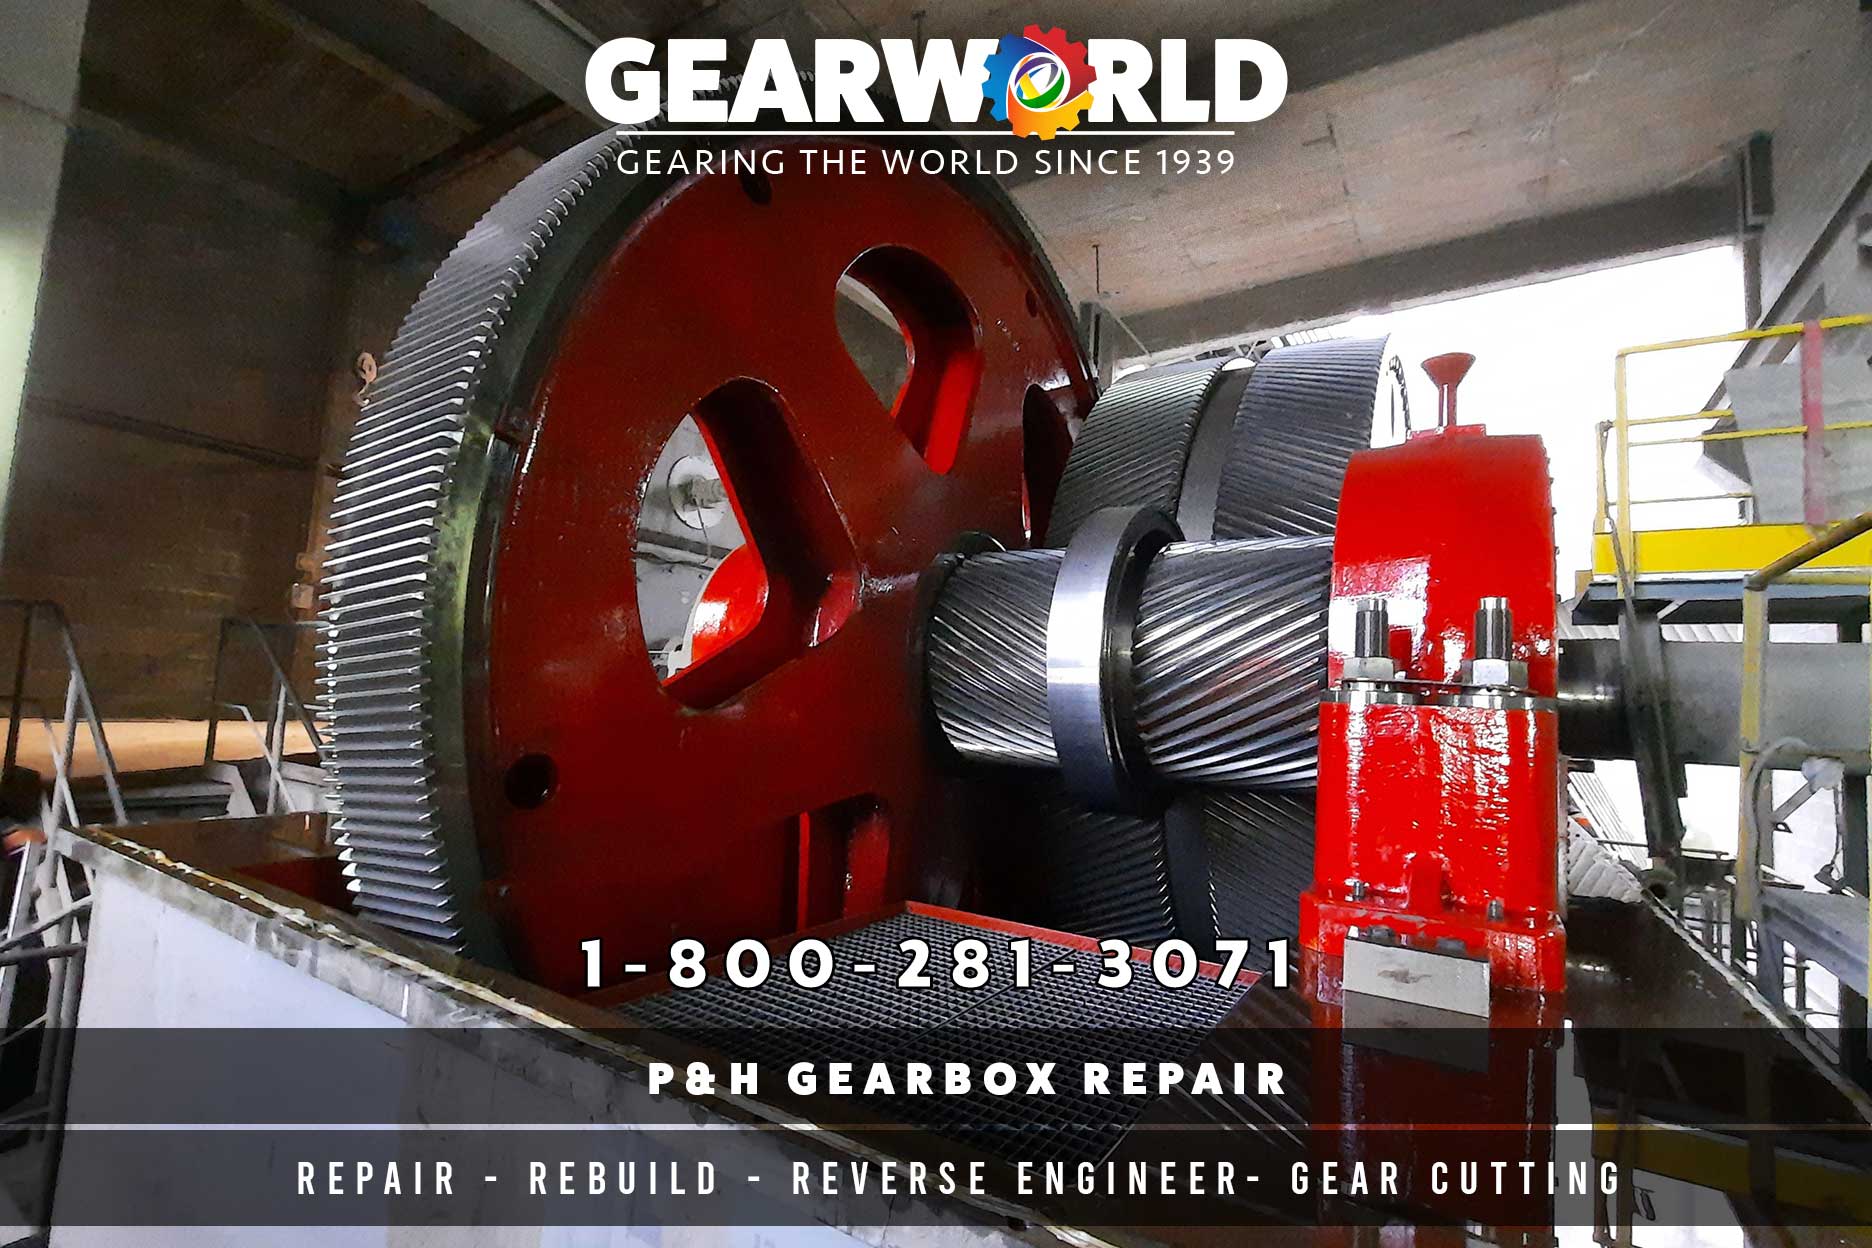 P&H Gearbox